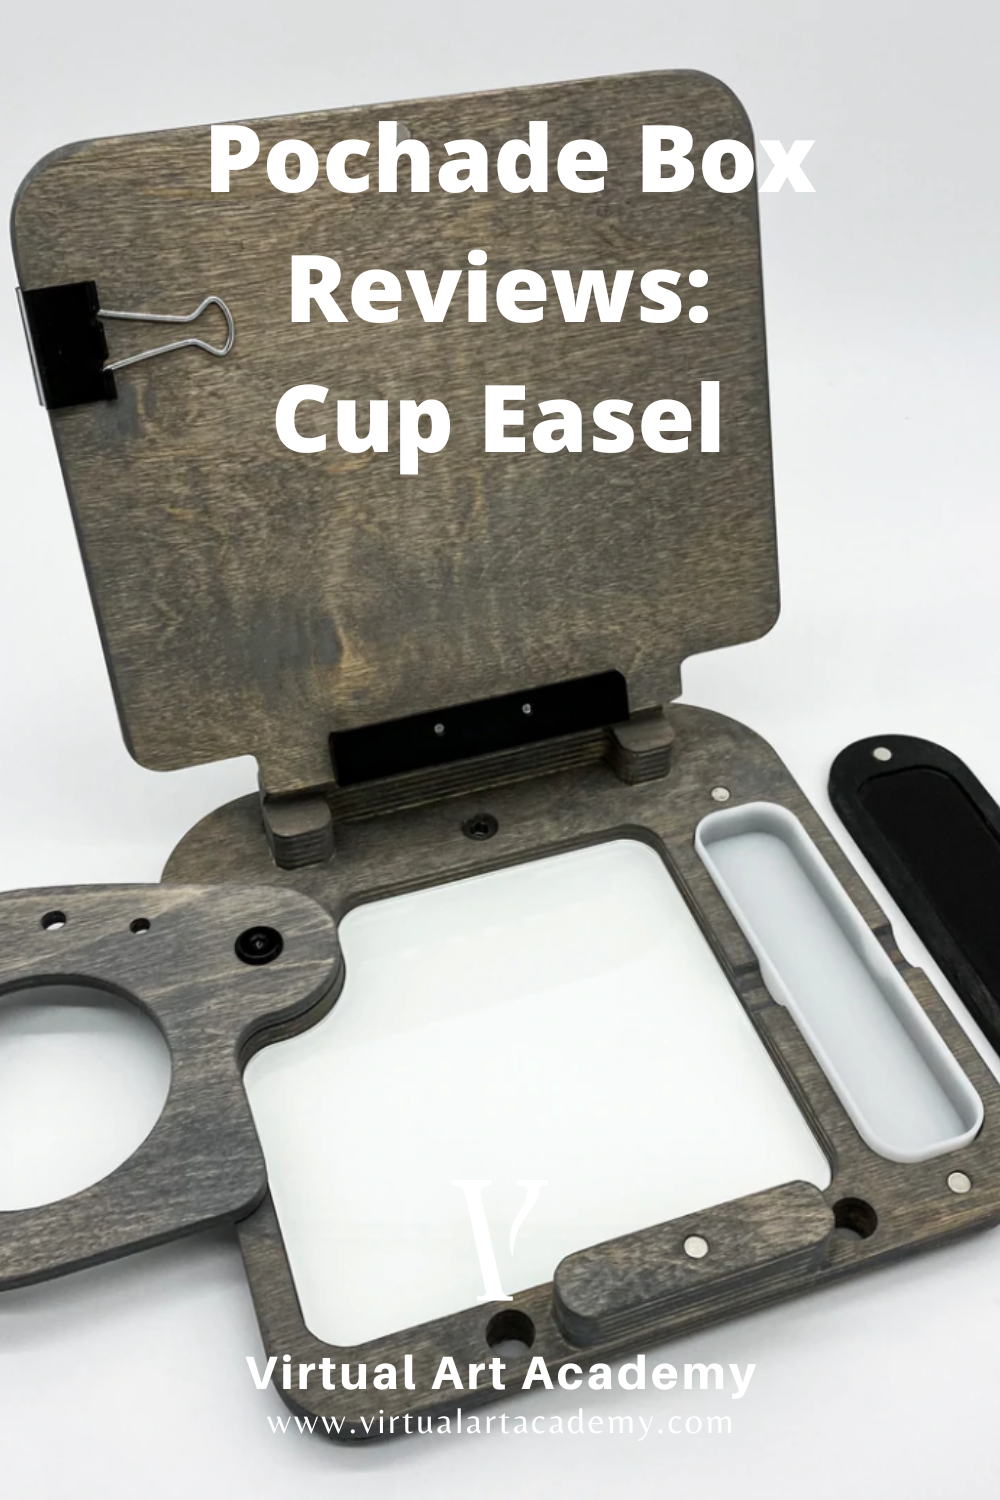 Cup Easel